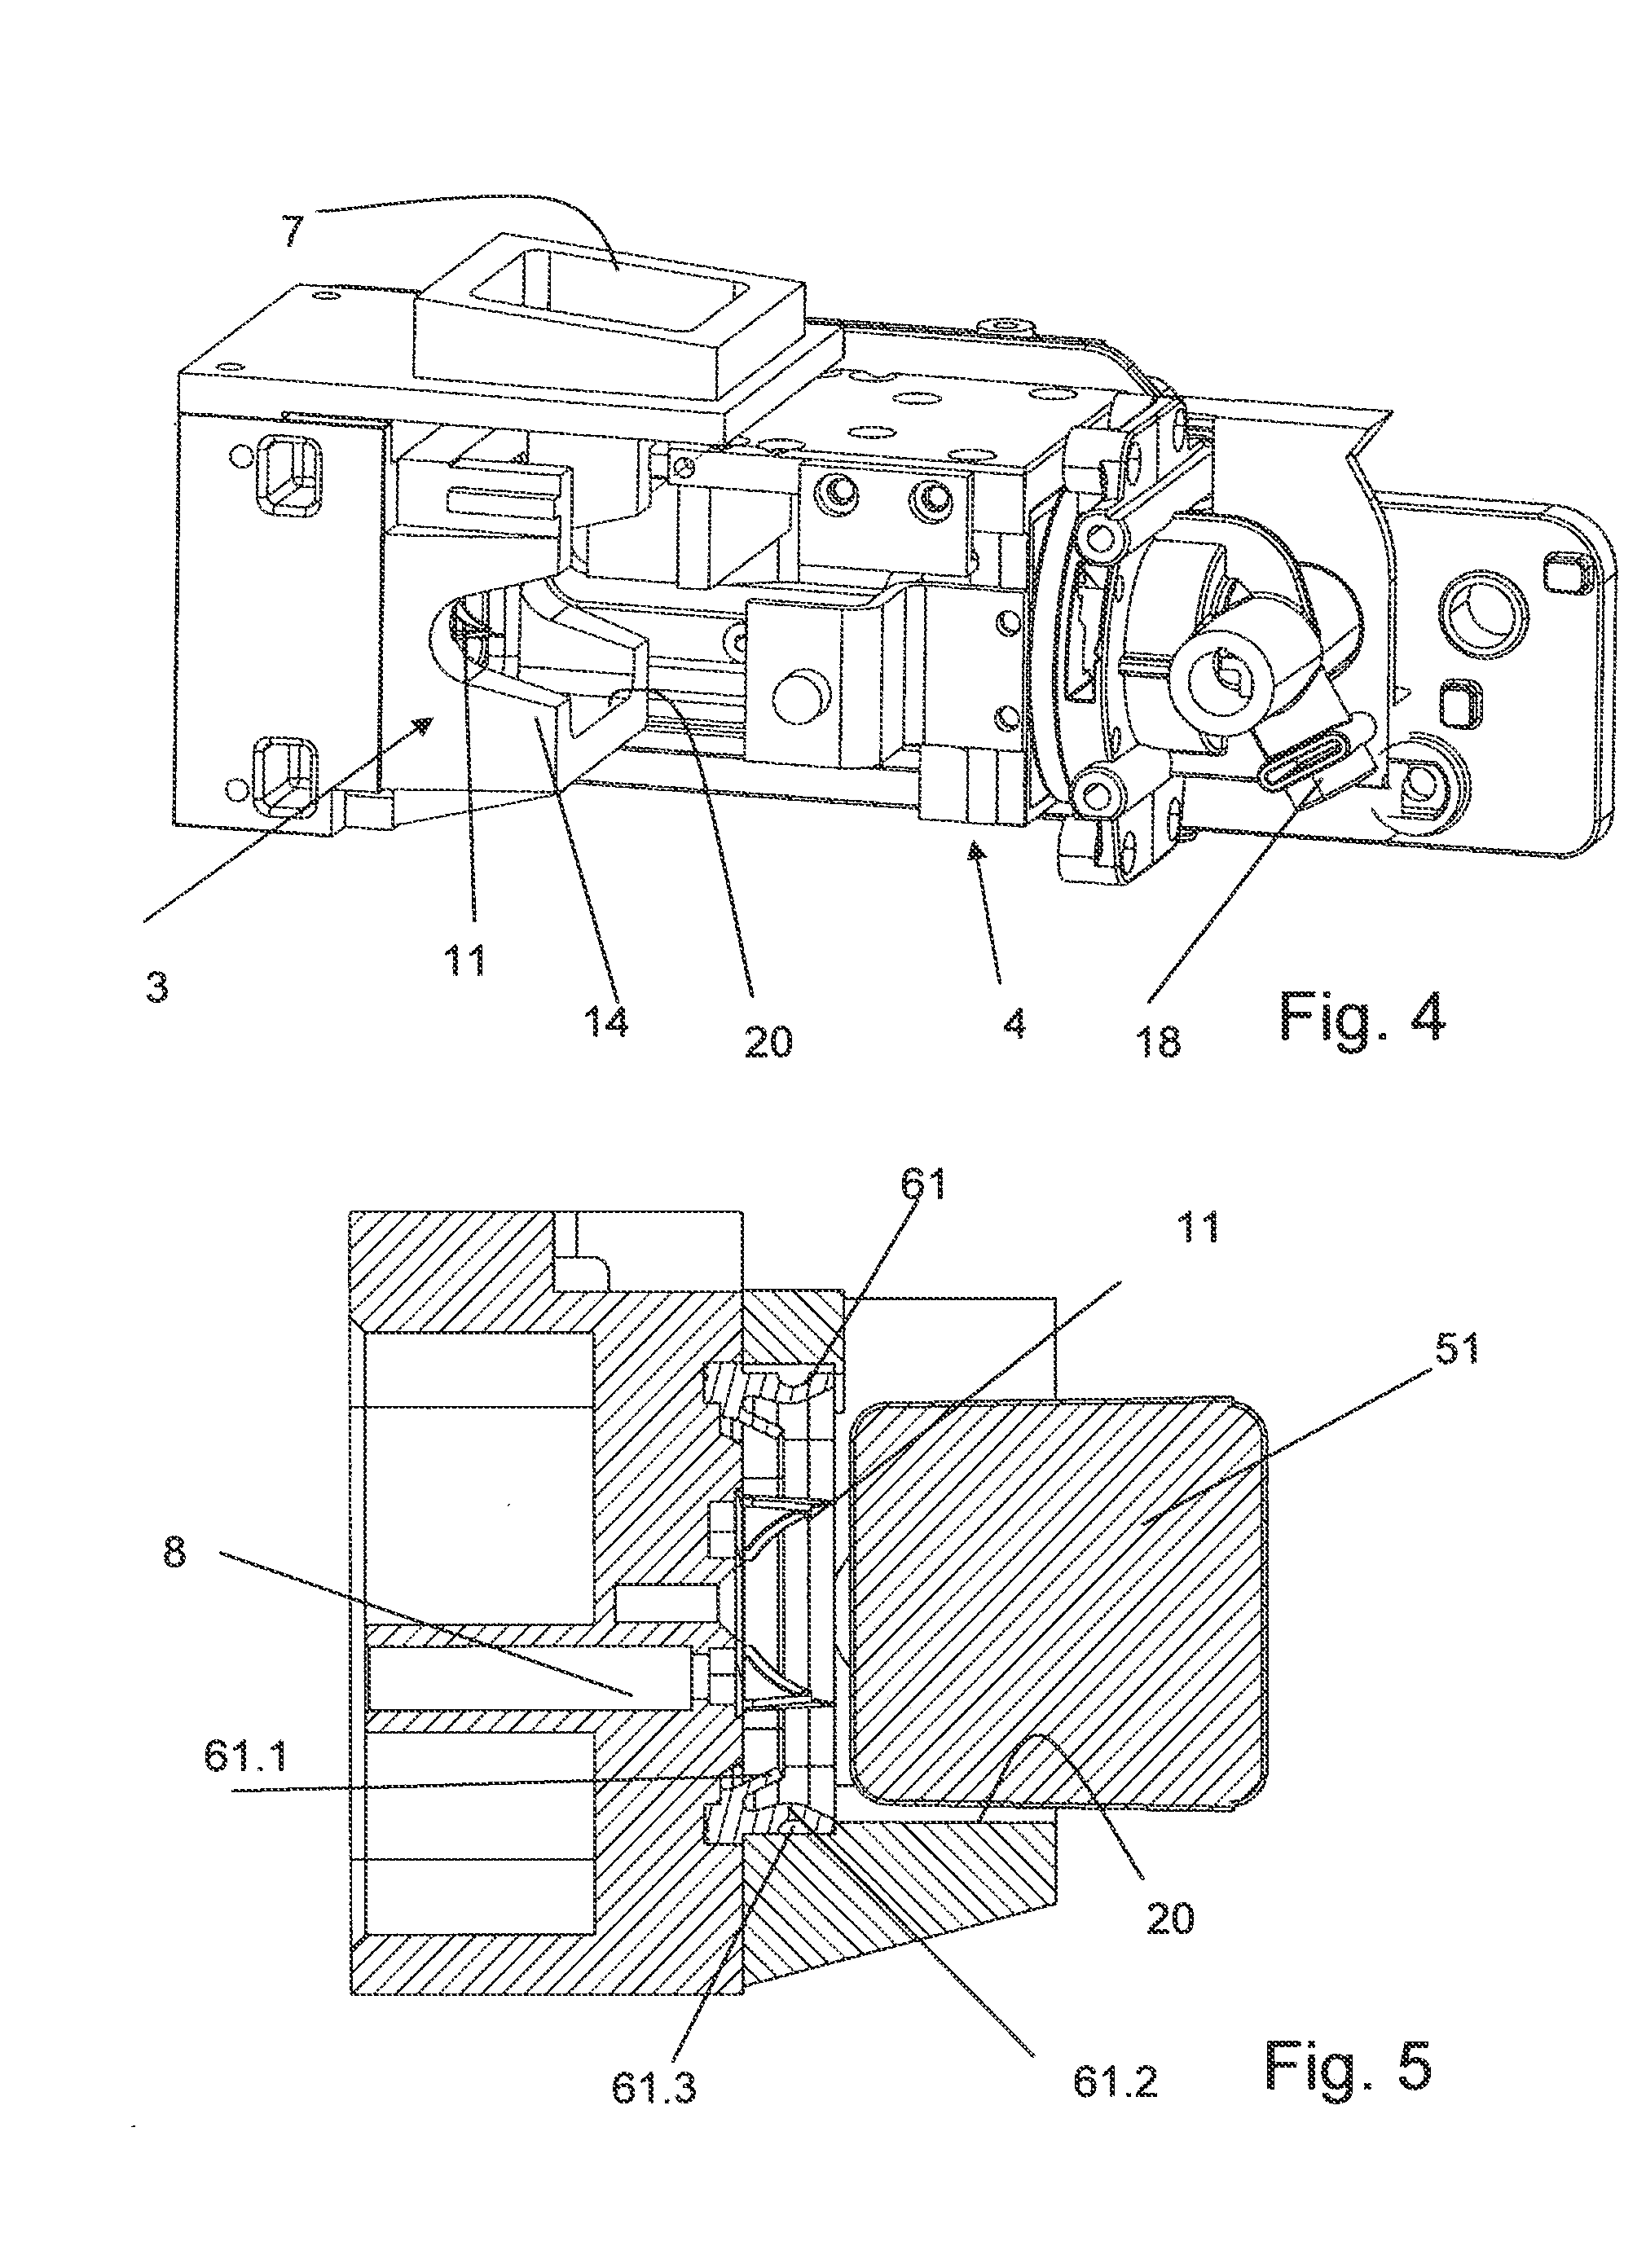 Extraction device and sealing system